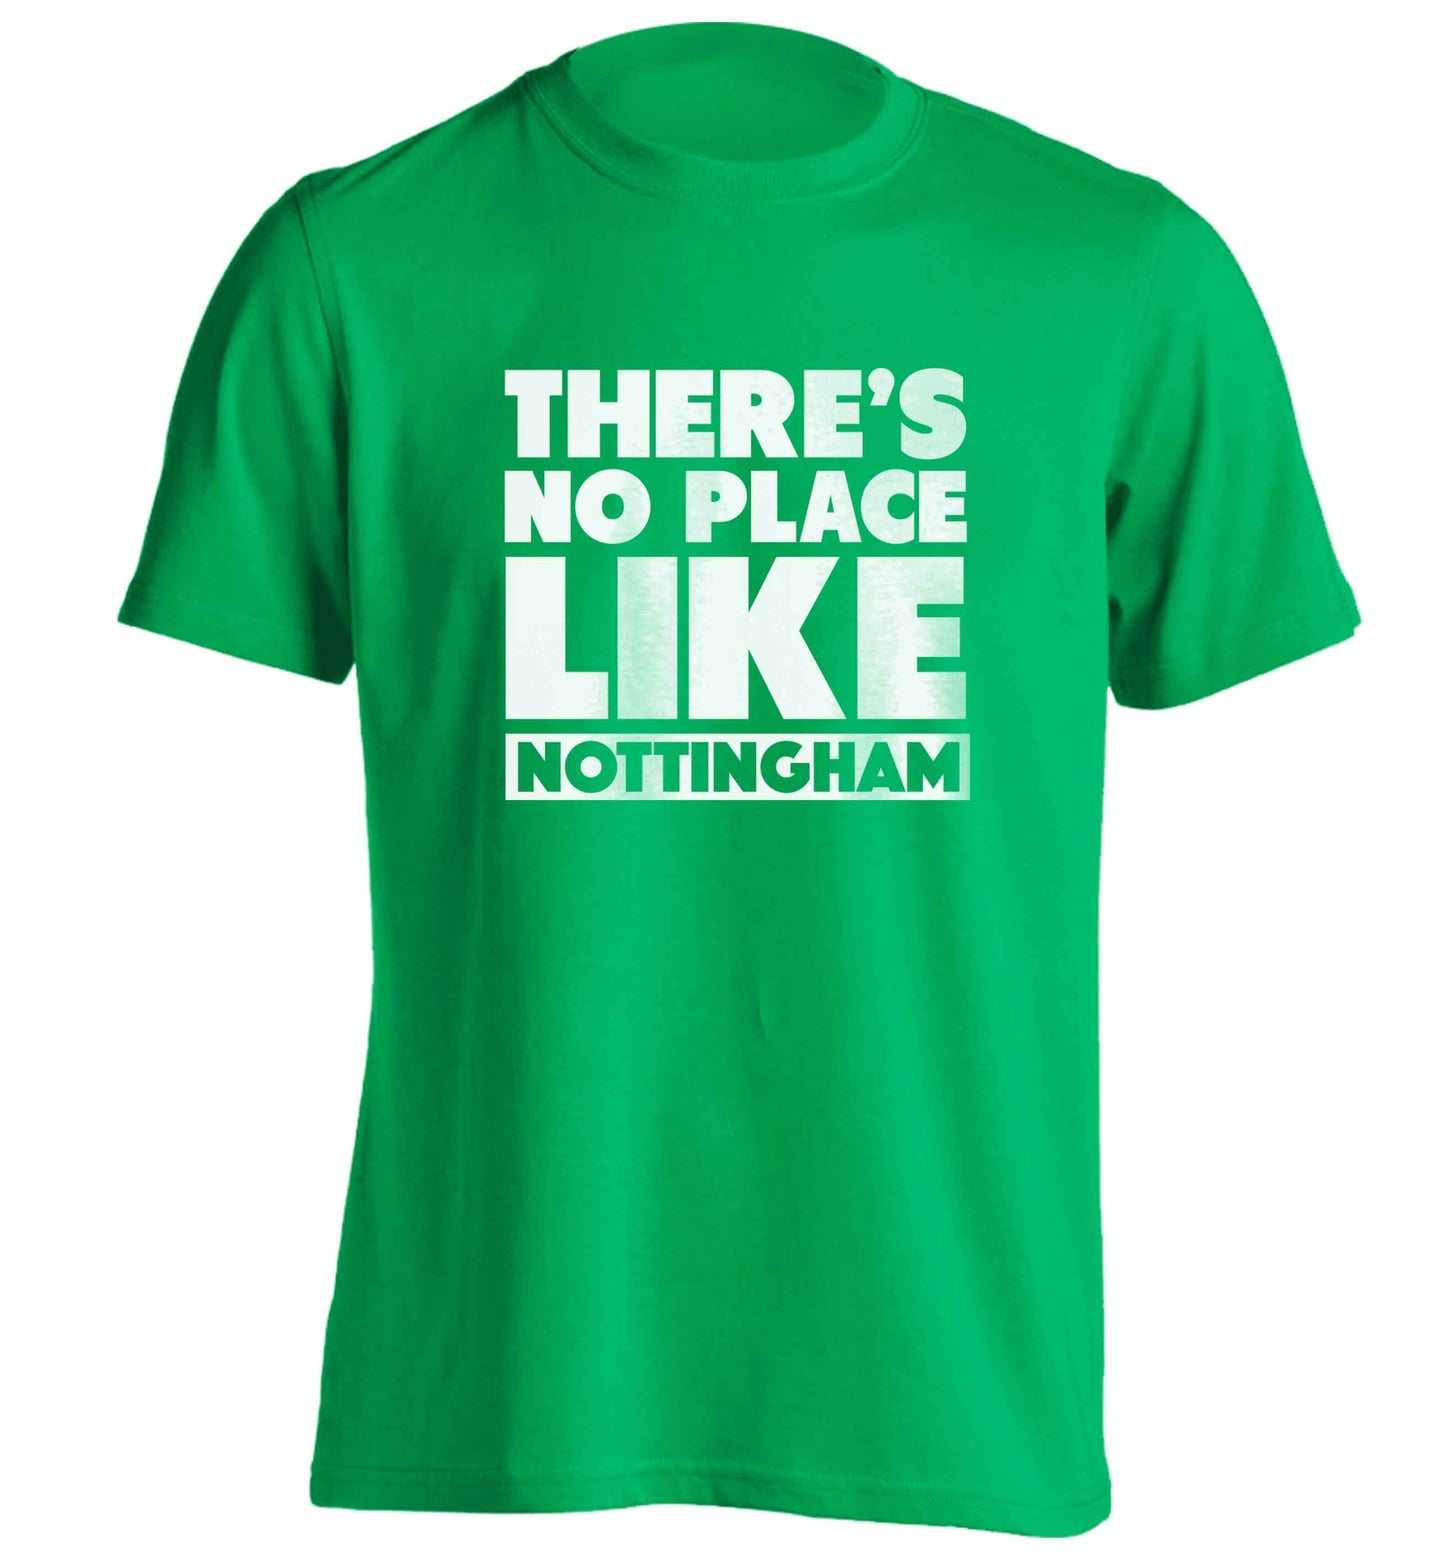 There's no place like Nottingham adults unisex green Tshirt 2XL